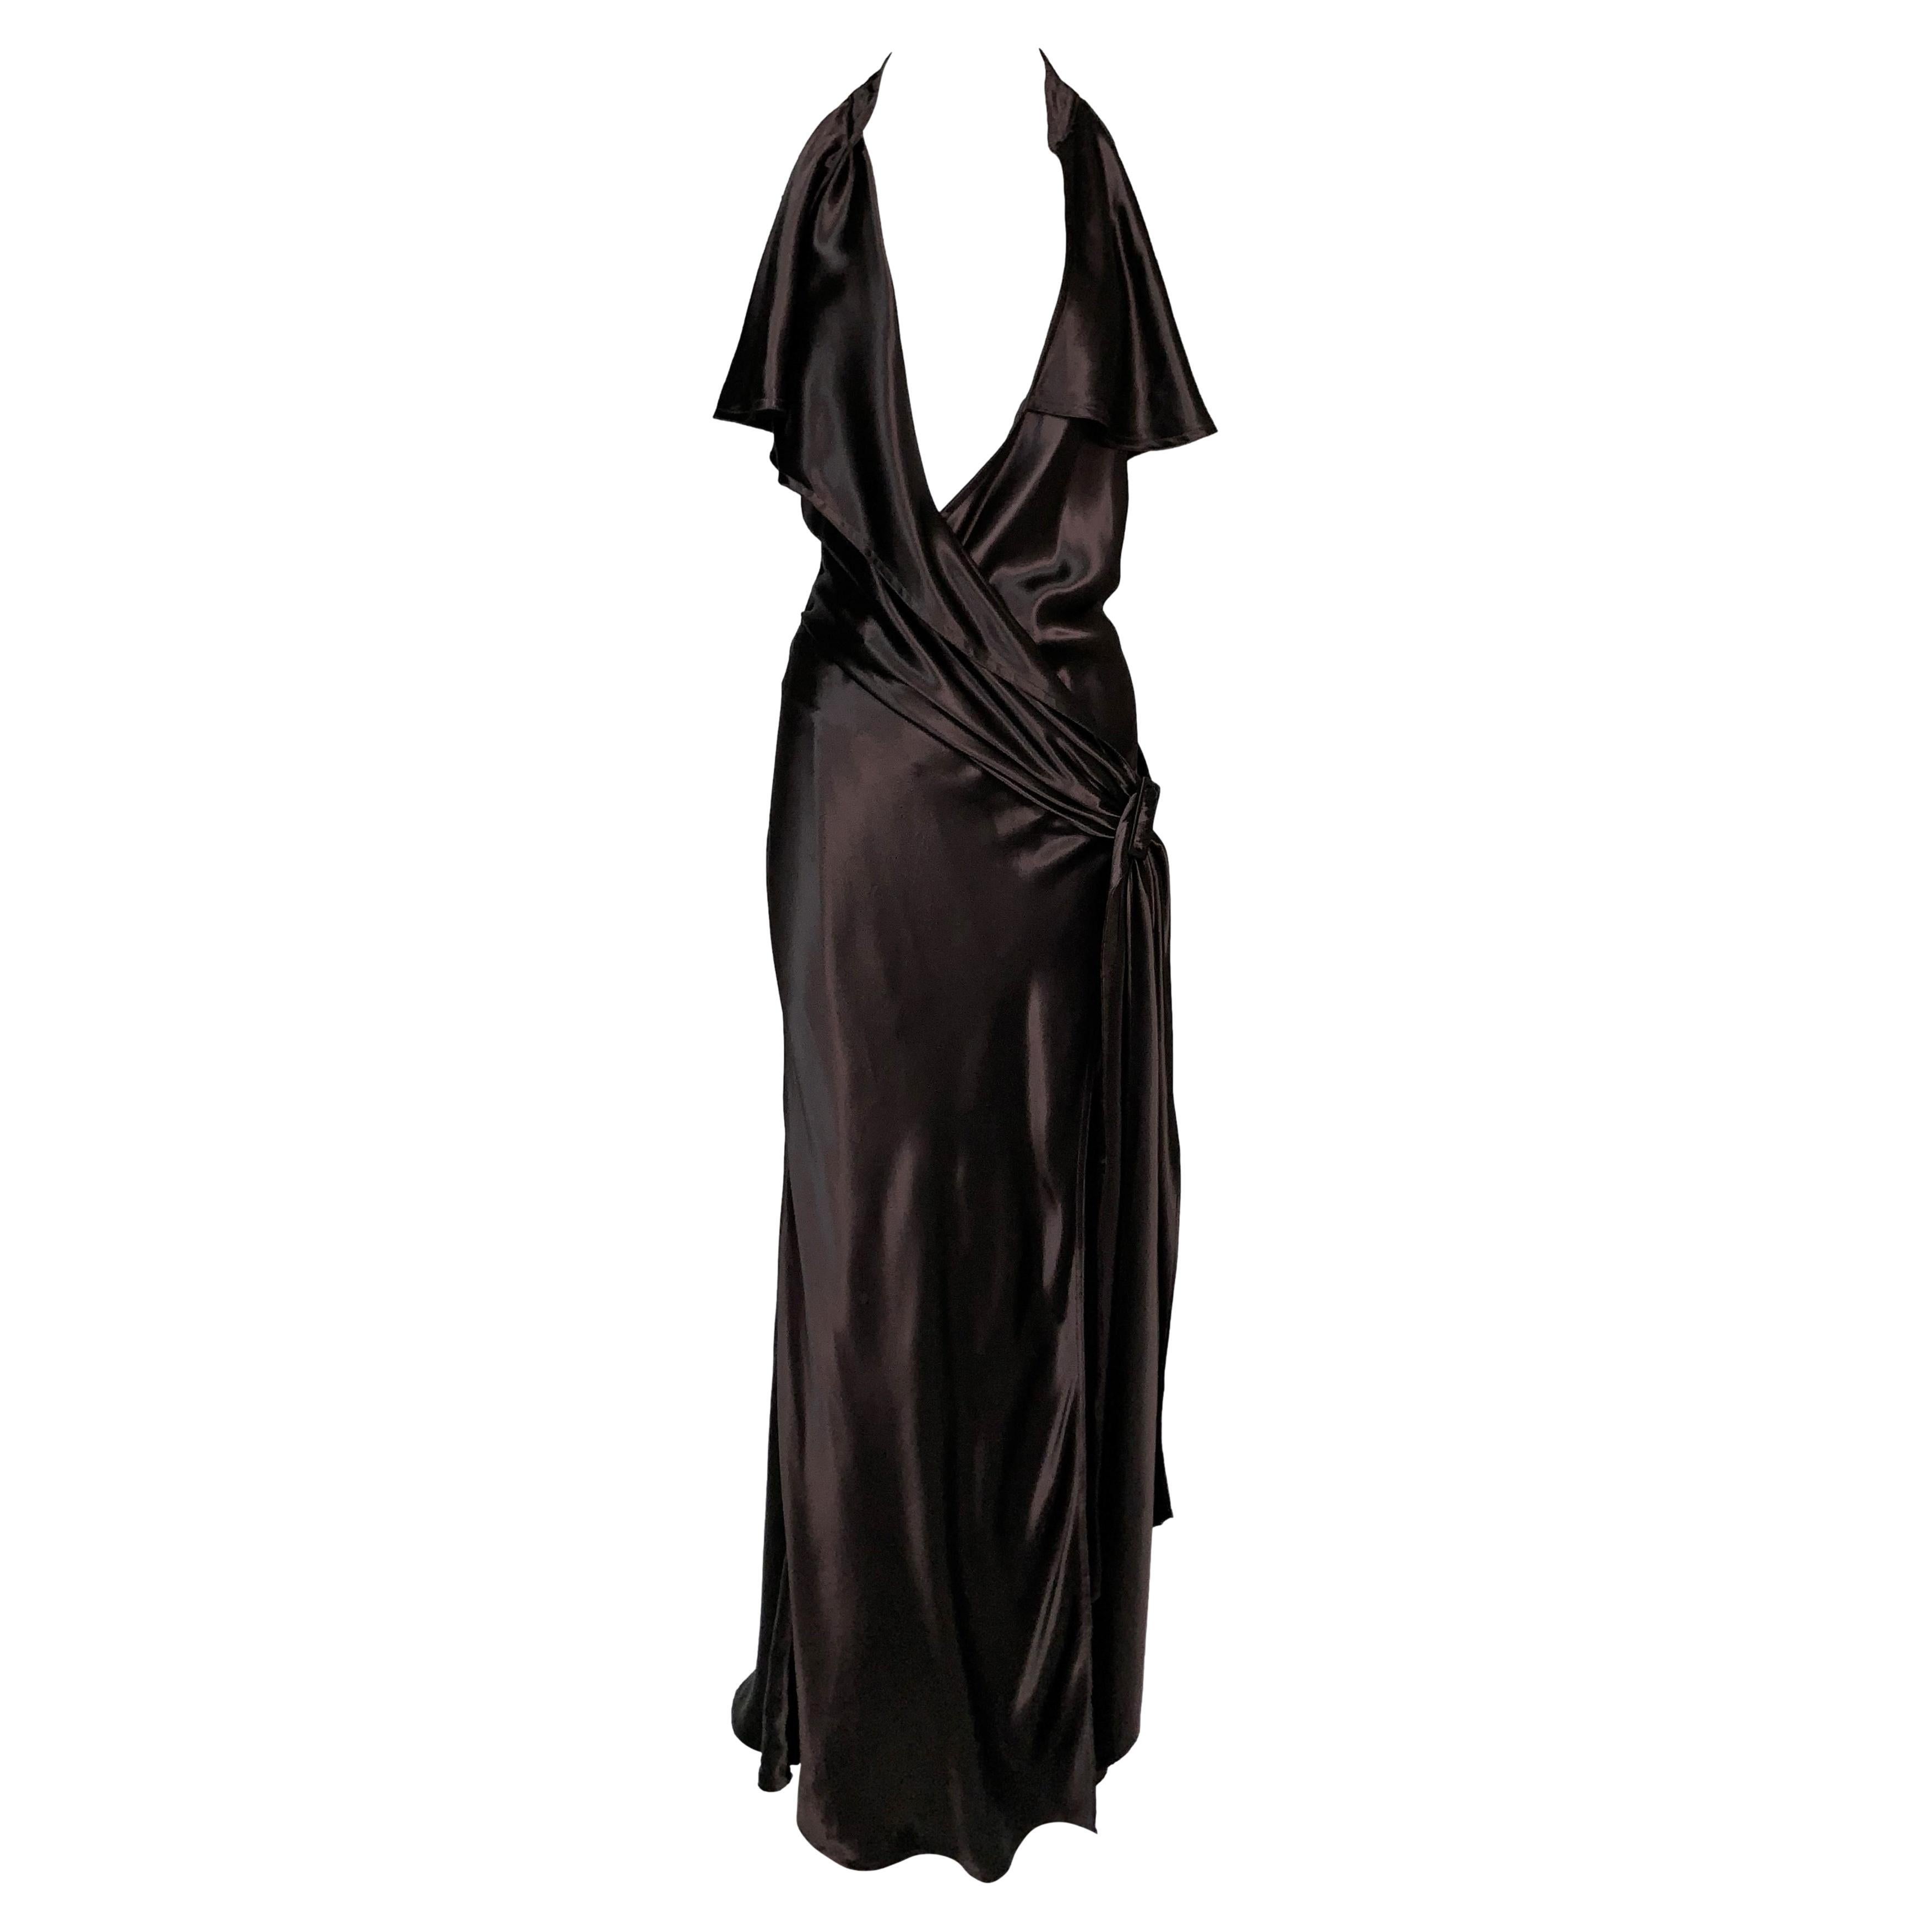 2000's Jean Paul Gaultier Brown Satin Plunging Cut-Out Gown Dress